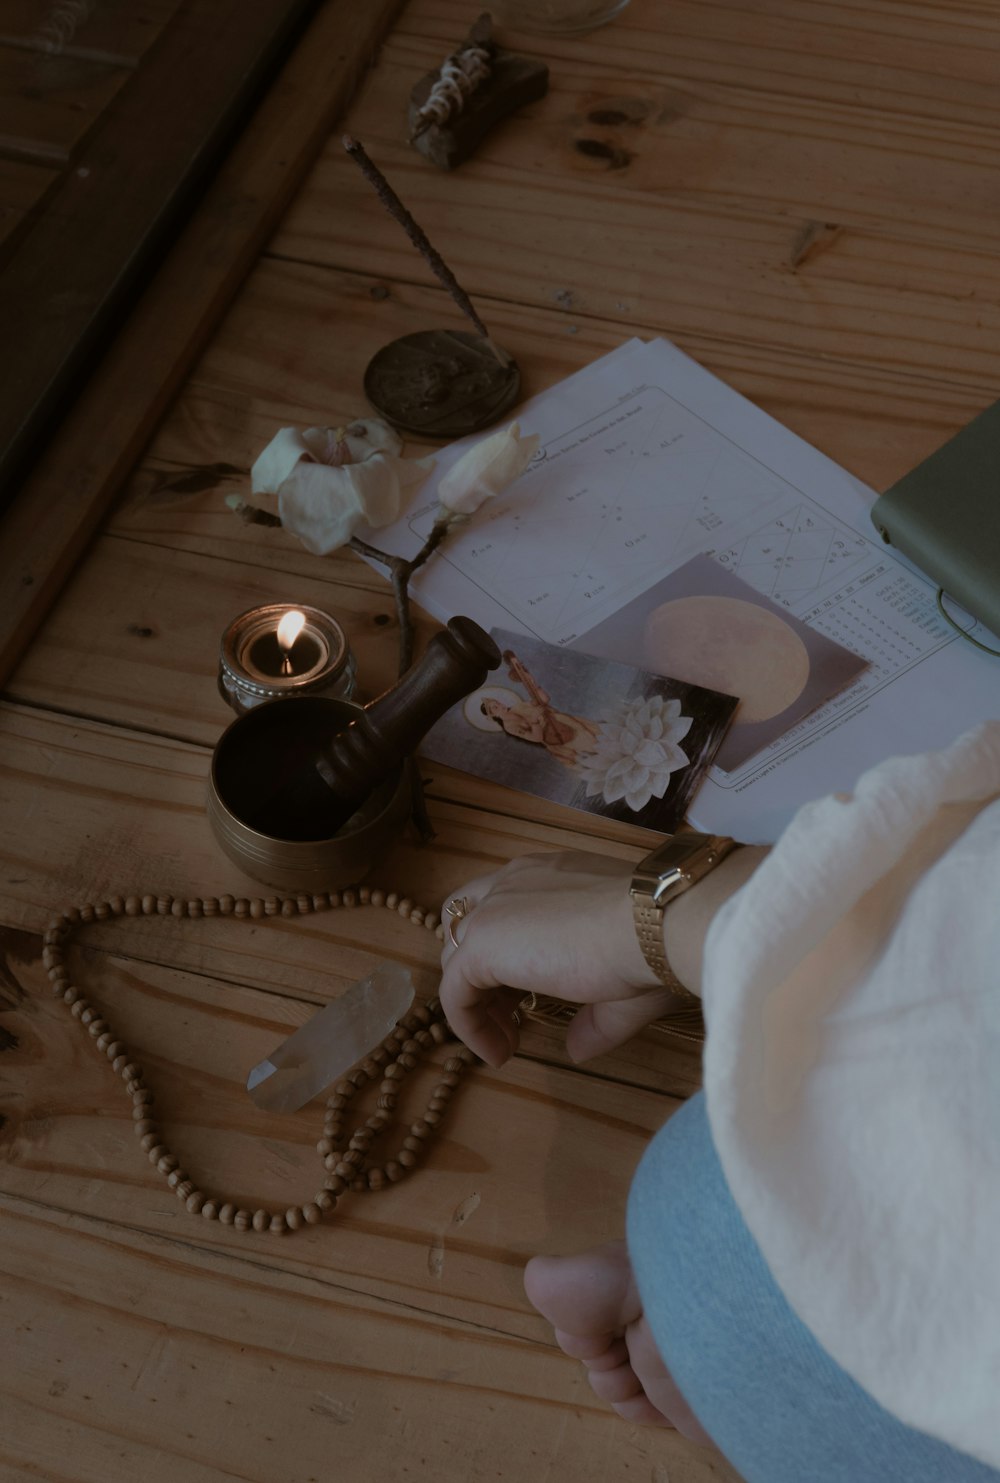 a table with a candle, a book, a necklace, and a cell phone